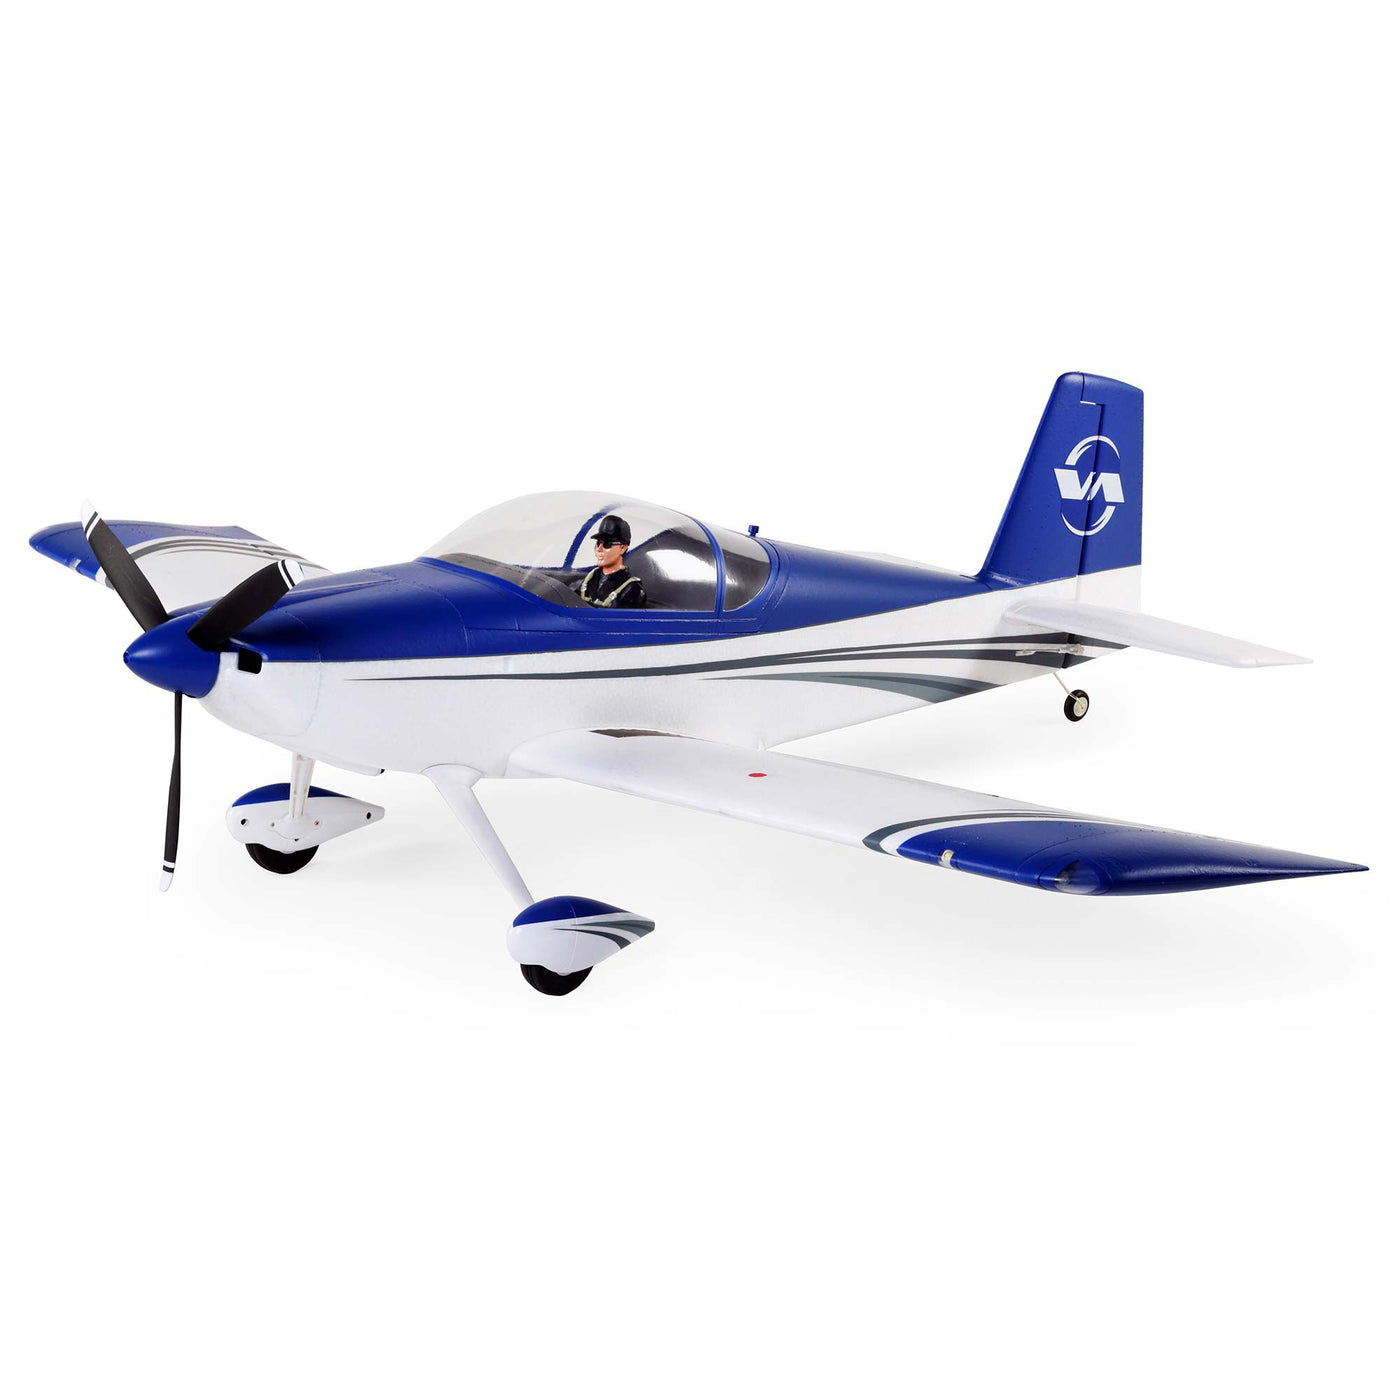 RV-7 1.1m BNF Basic with SAFE Select and AS3X E-flight 01850